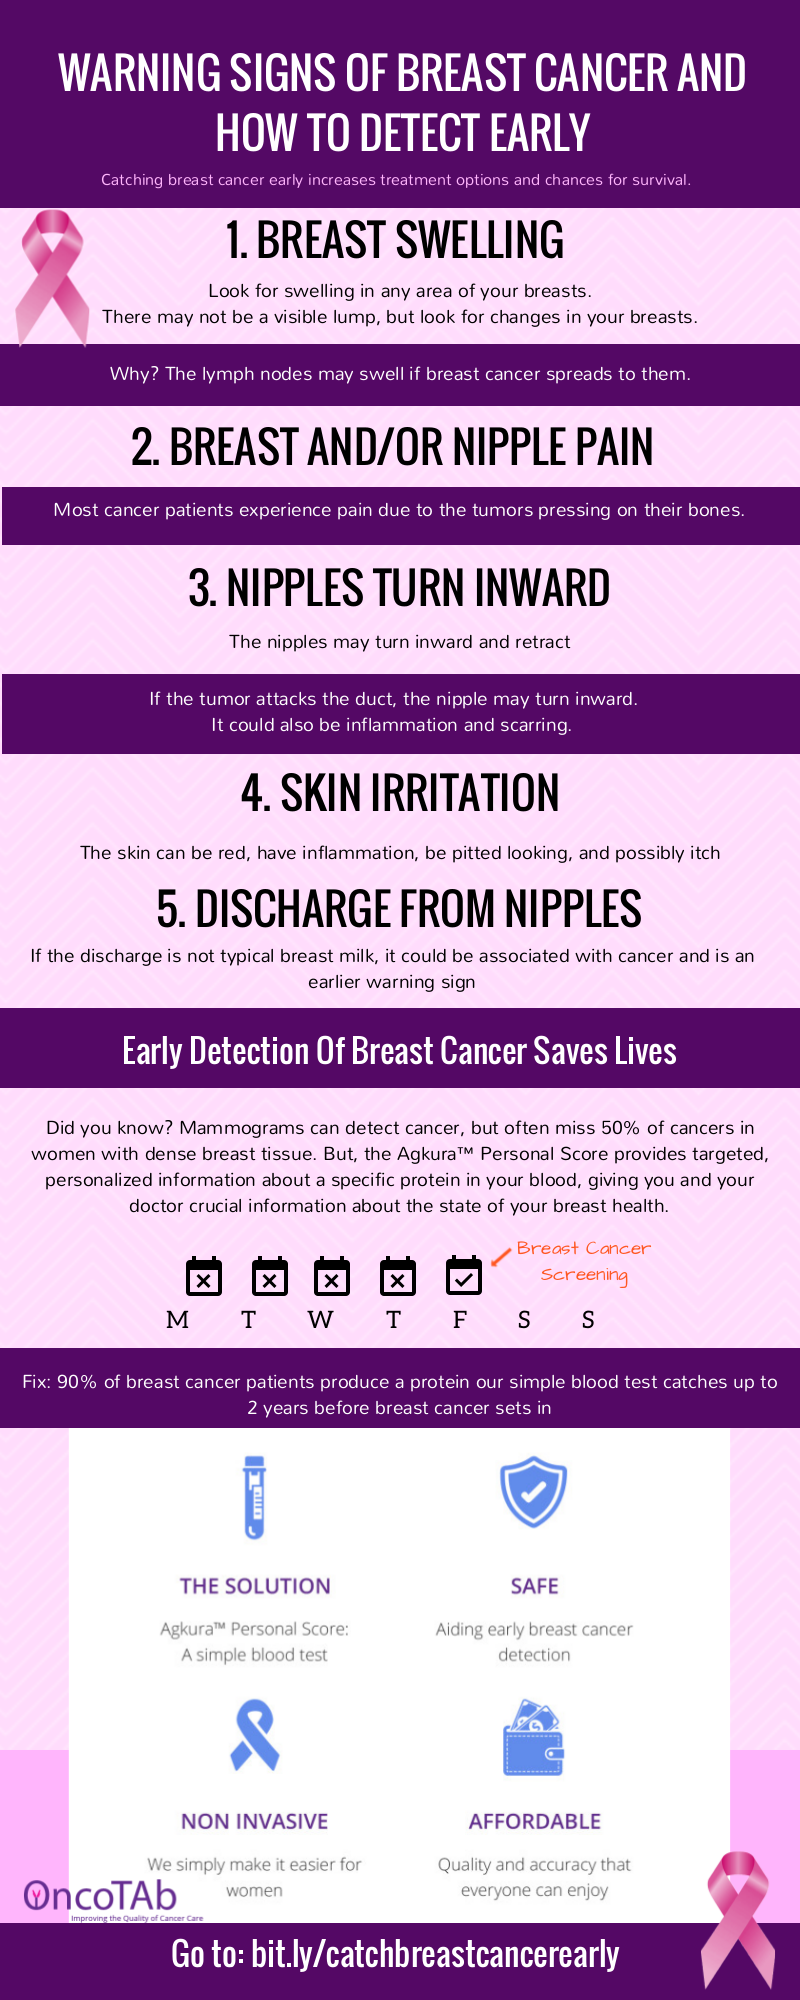 Warning Signs of Breast Cancer Image